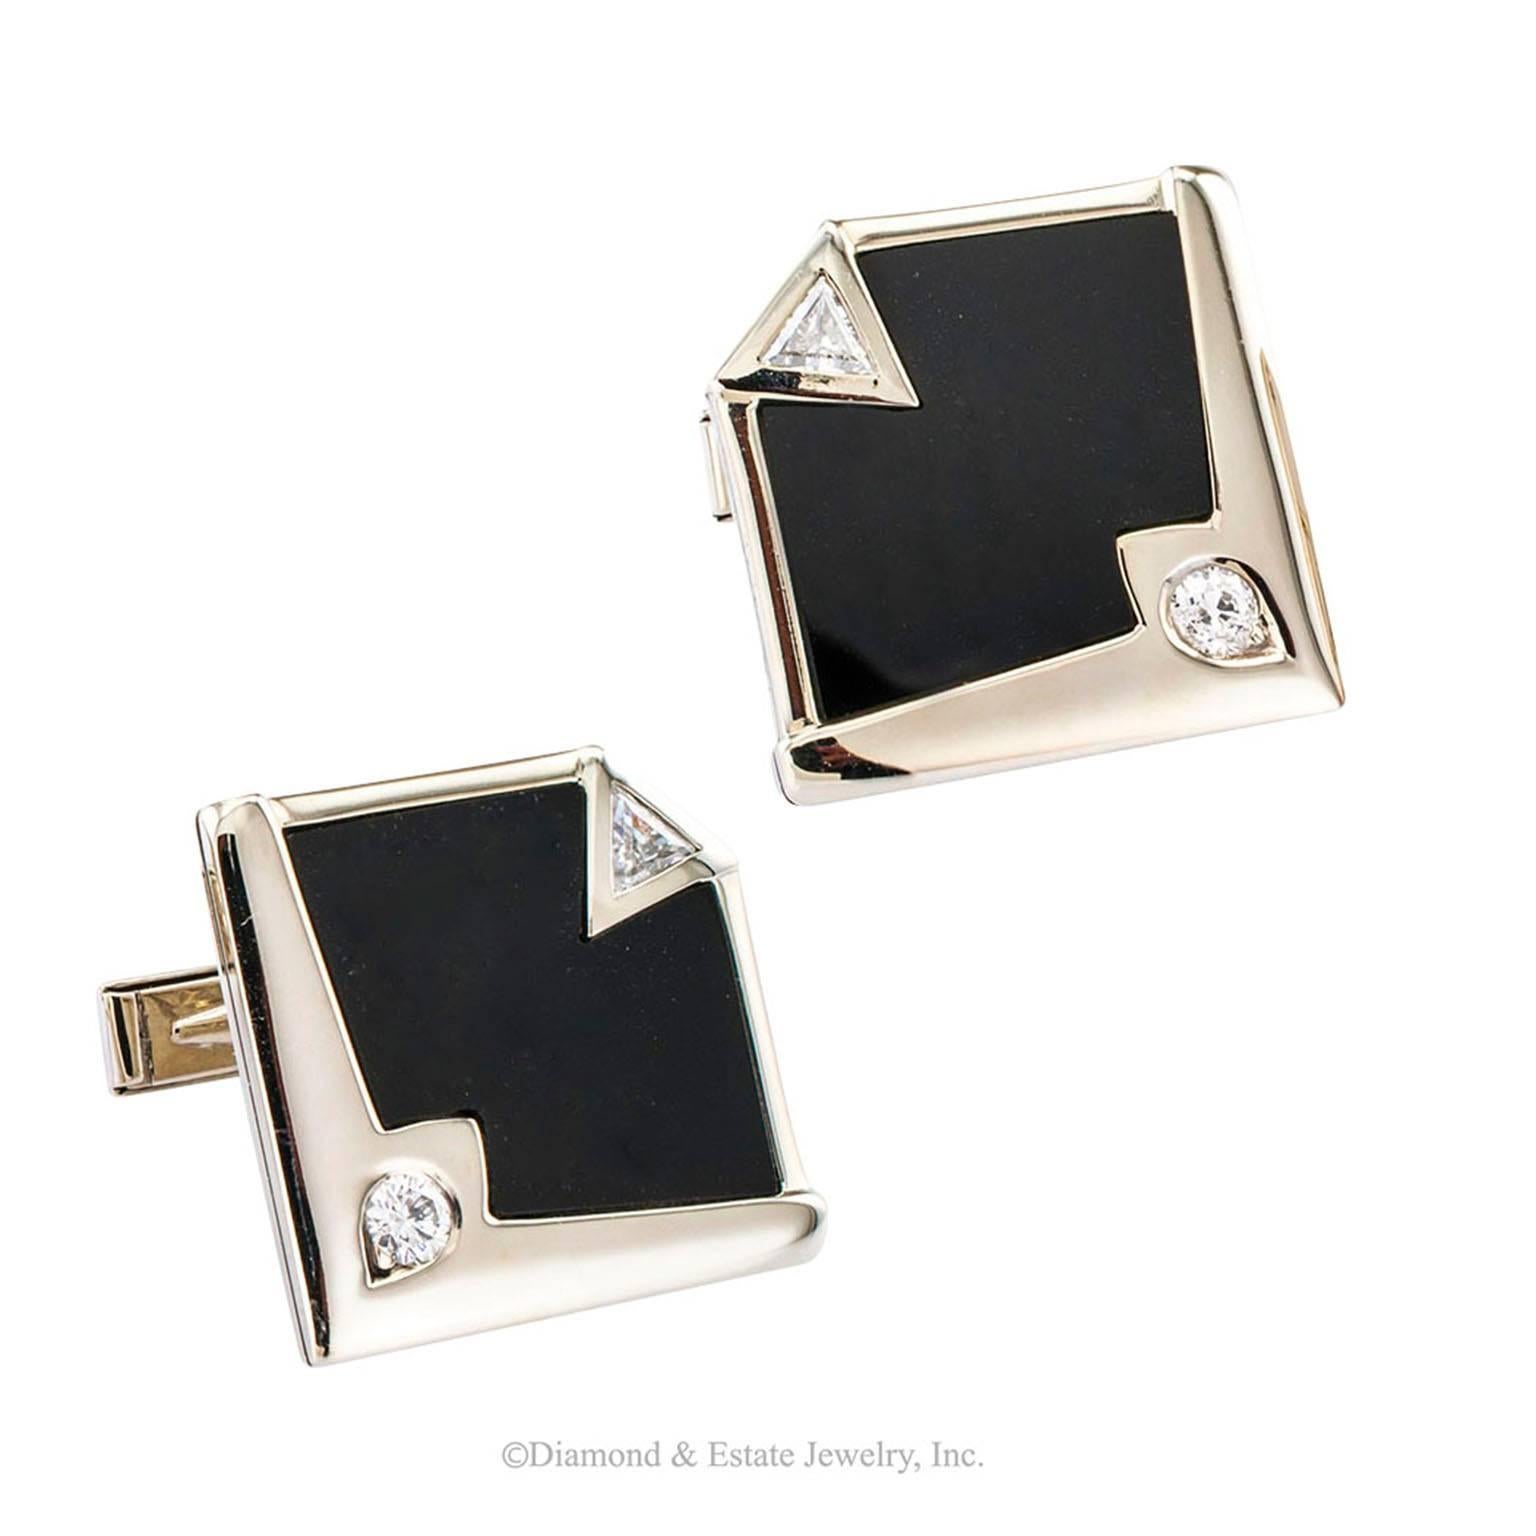 Modernist Onyx Diamond White Gold Cuff Links

Onyx and diamond 14 karat white gold cuff links.  The avant garde designs take full advantage of the aesthetic derived from harmonious balance between sharp angled lines and mirror-polished surfaces. 